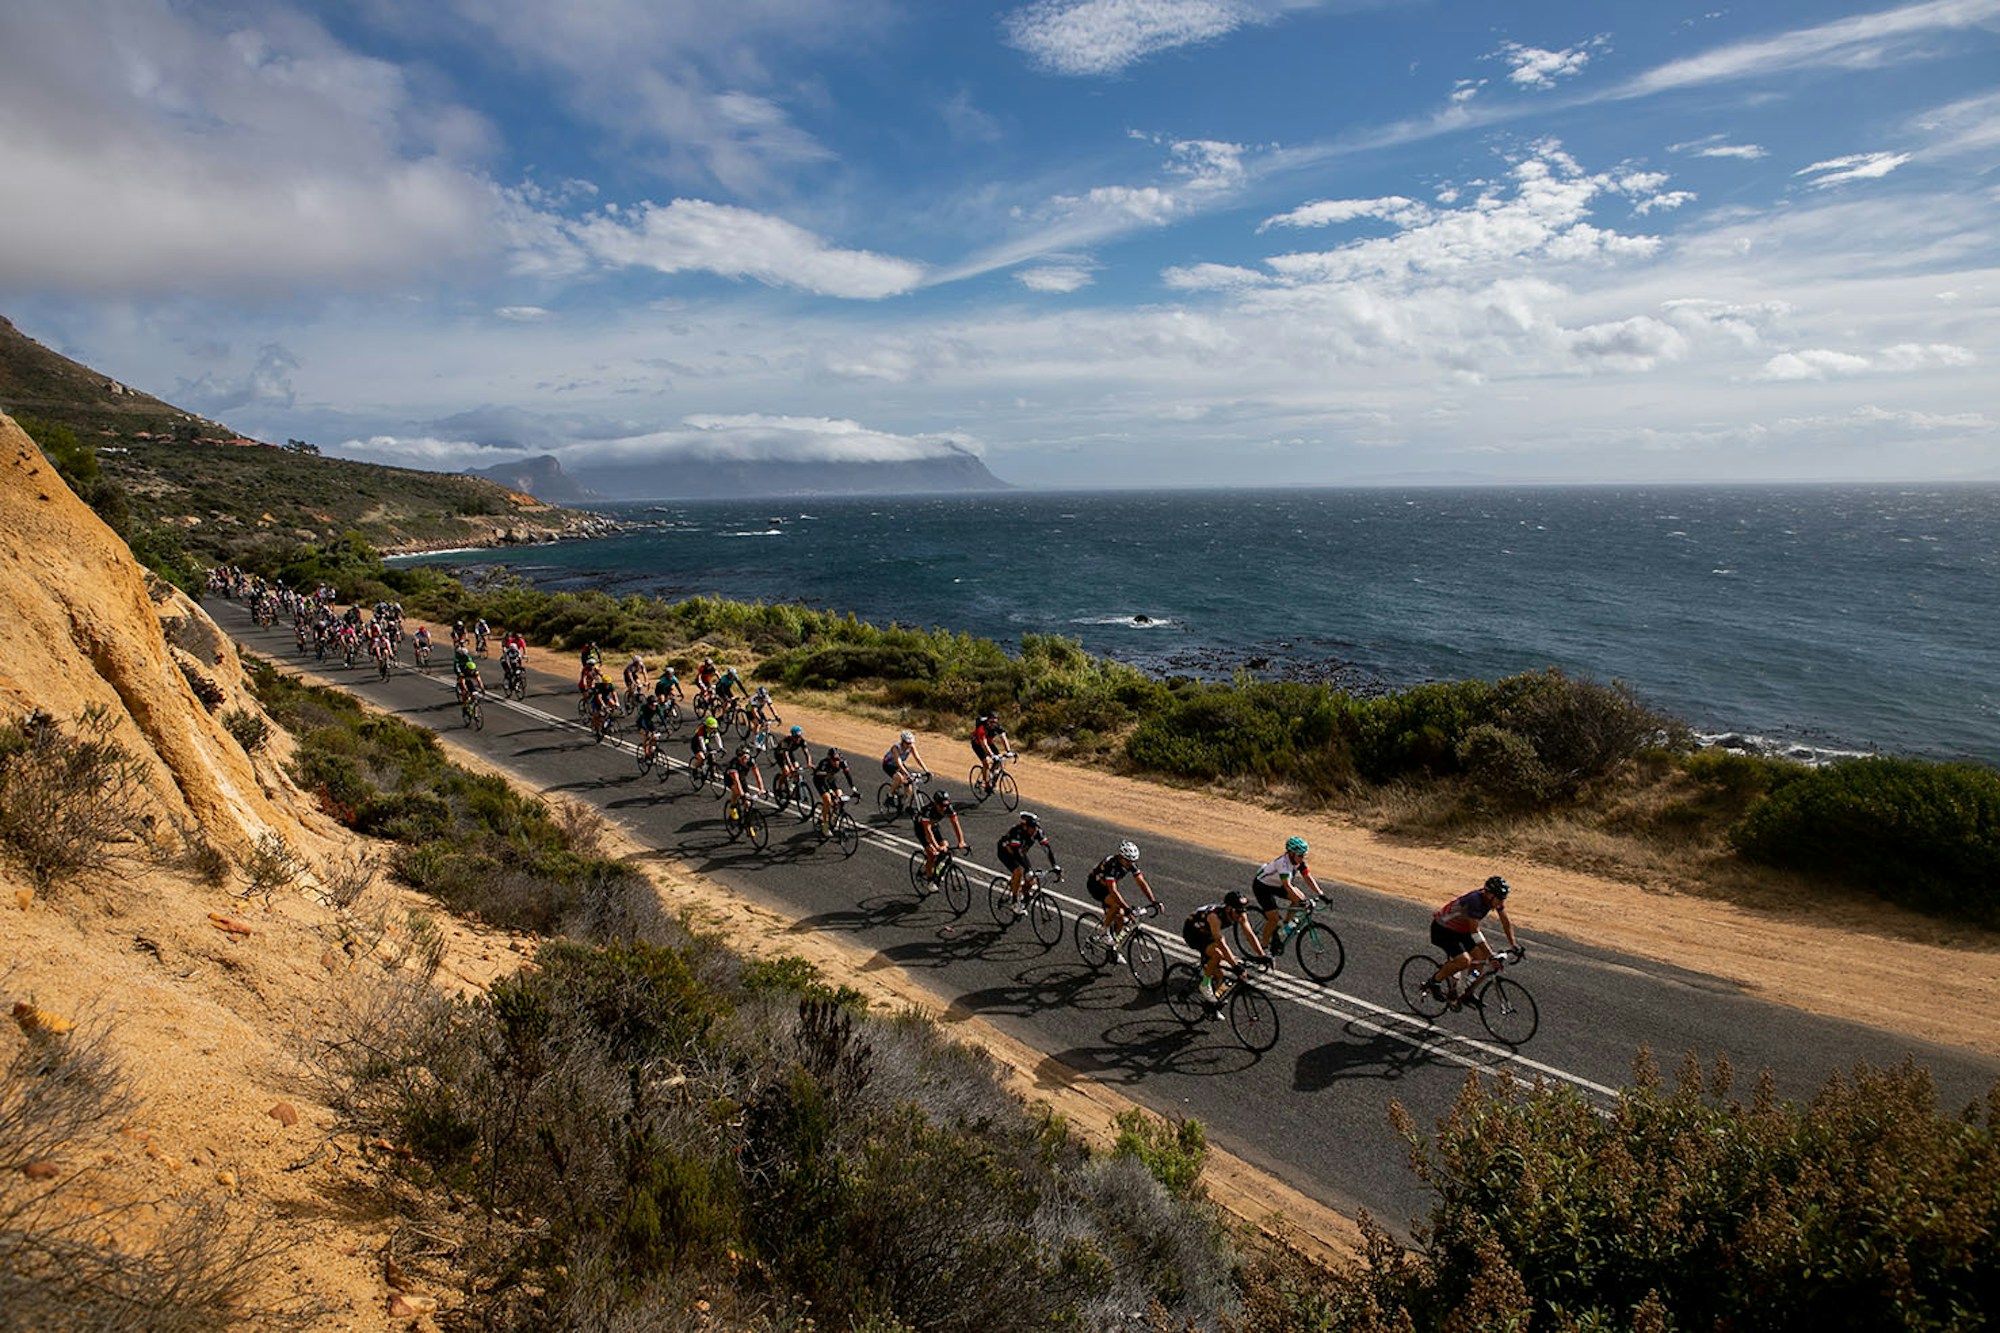 cape town cycle tour date